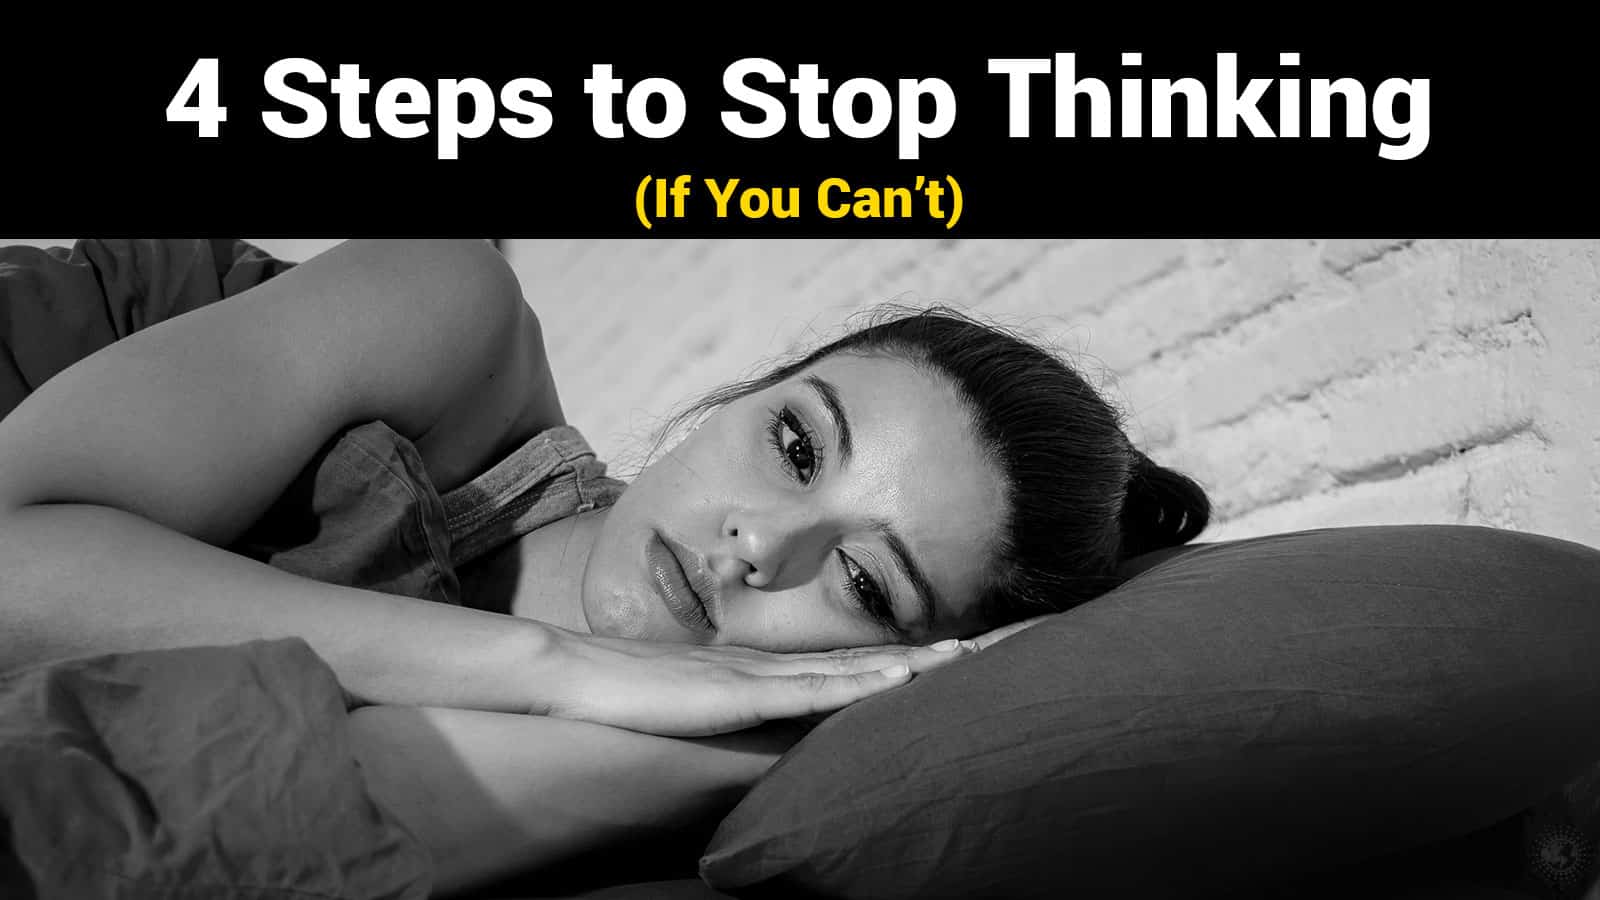 4 Steps to Stop Thinking (If You Can’t)